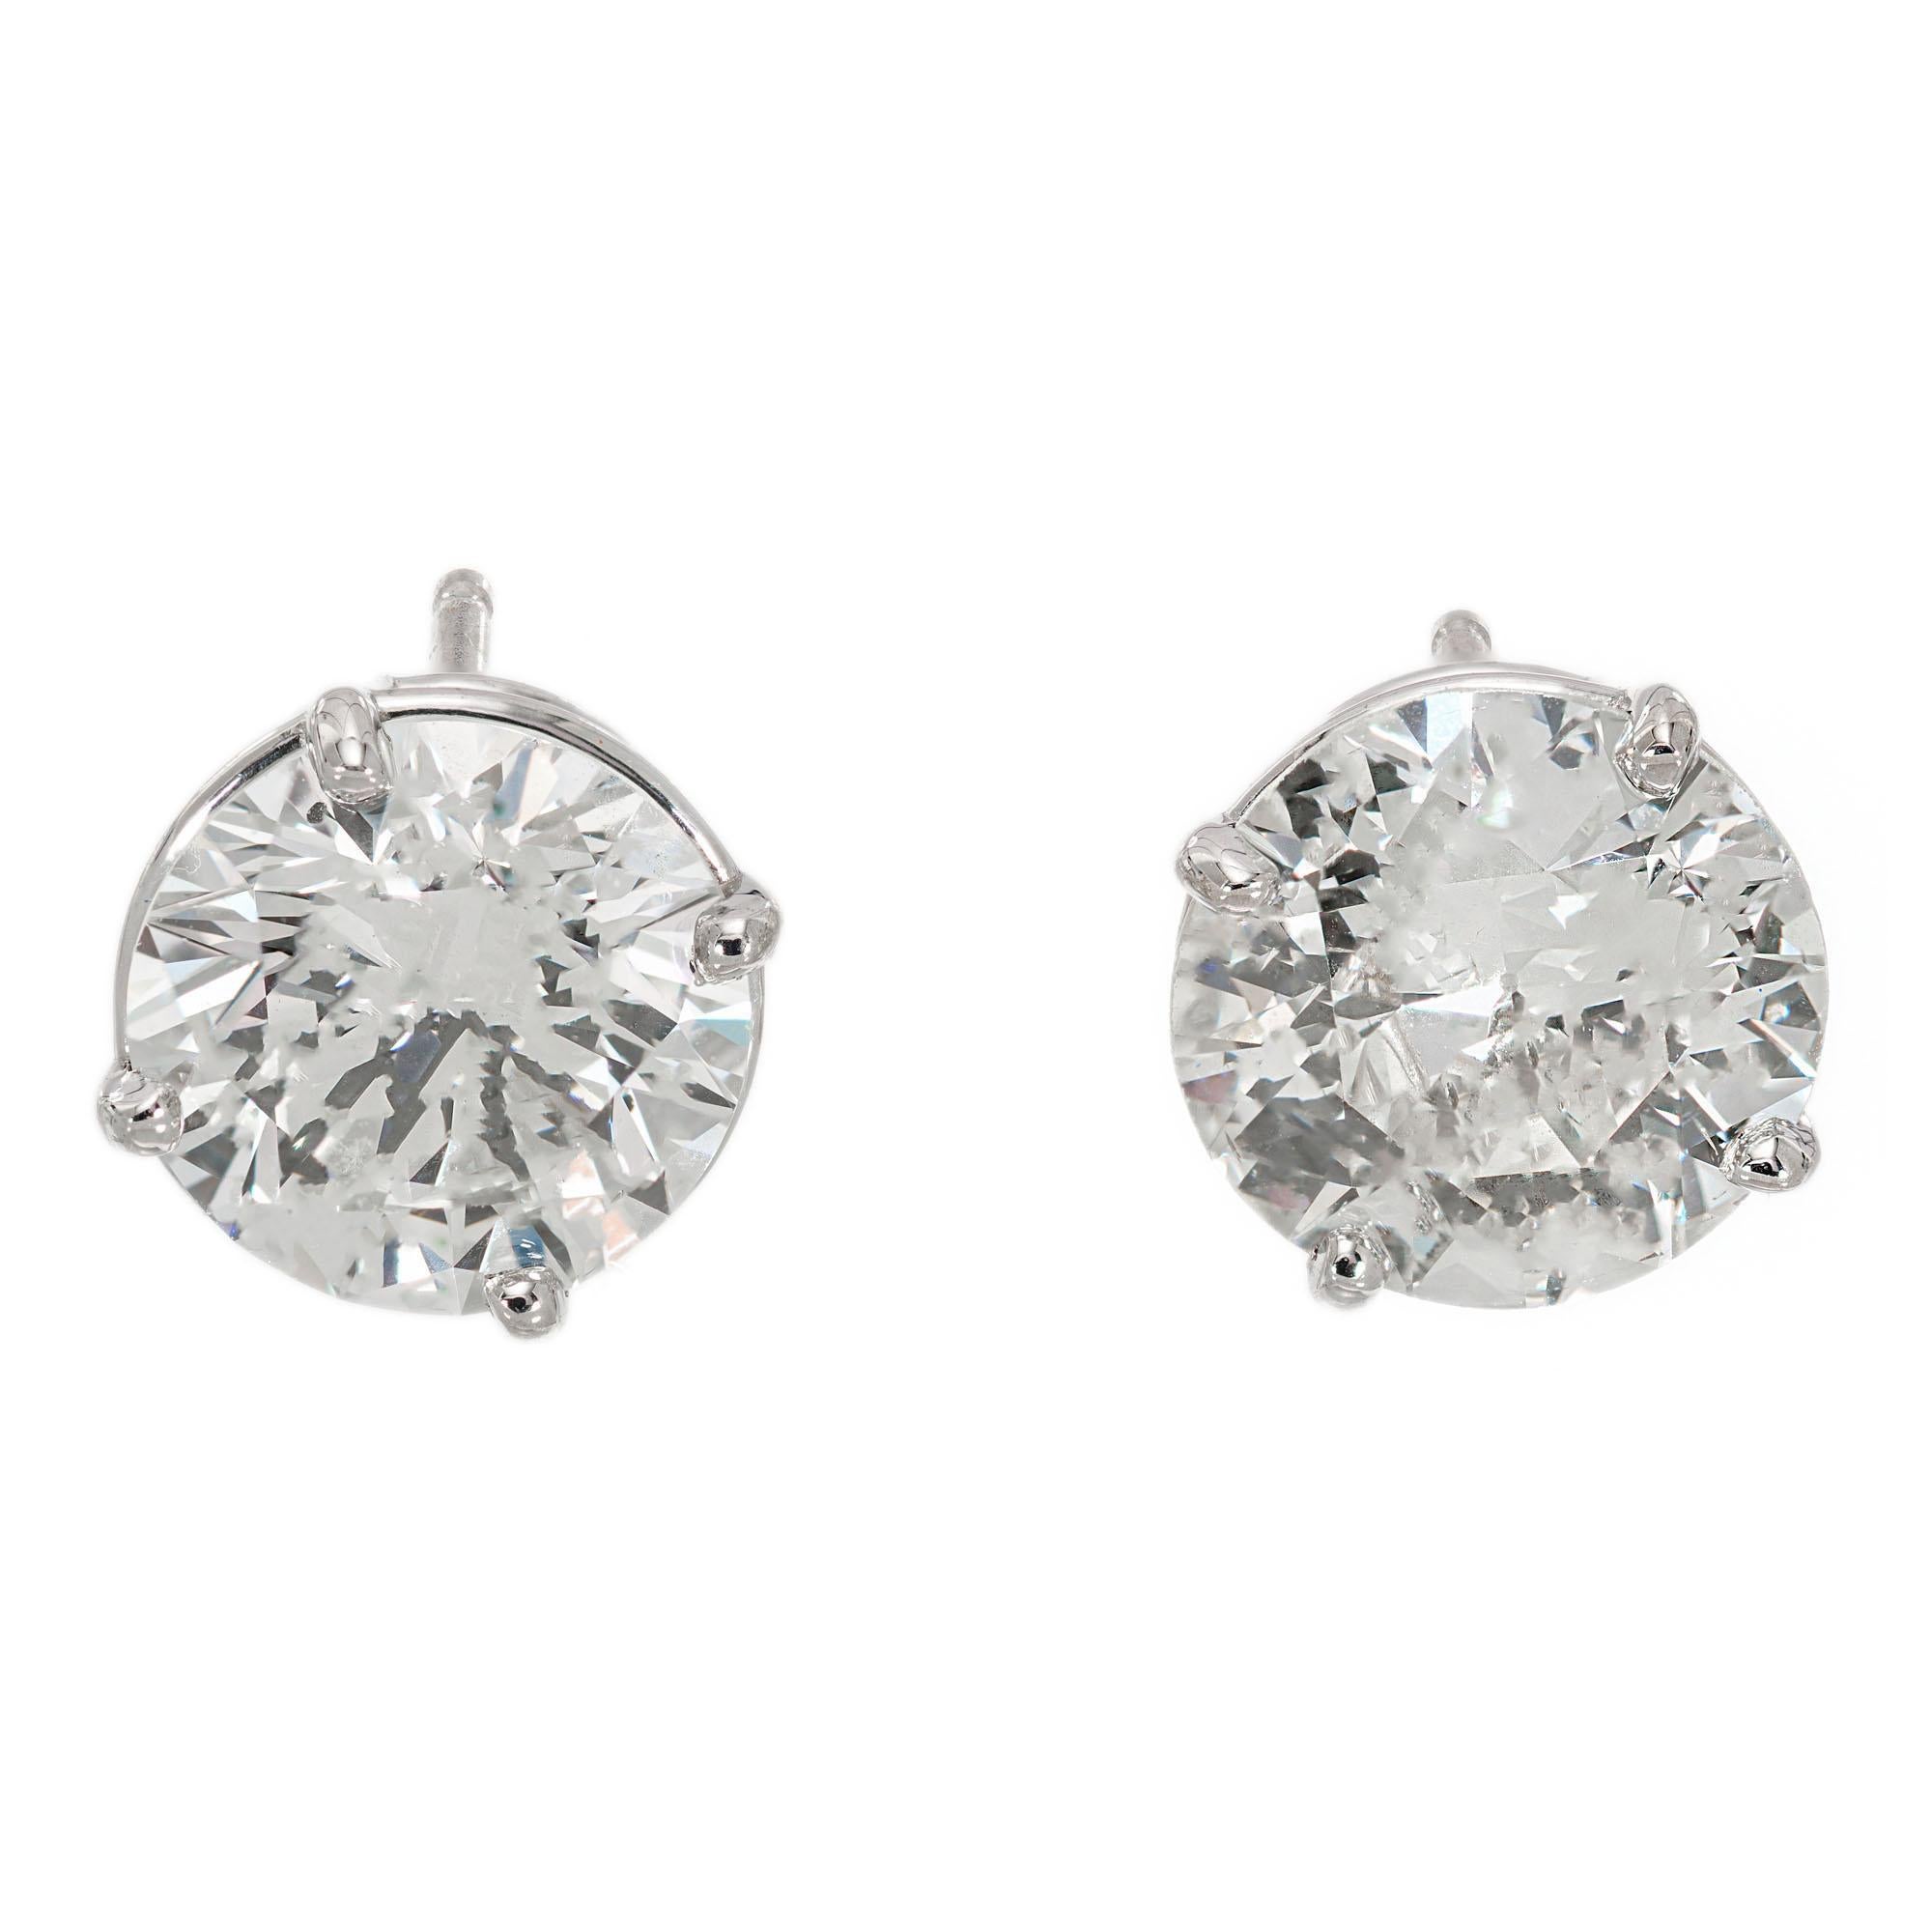 Peter Suchy GIA Certified 3.08 Carat Diamond Platinum Stud Earrings In New Condition For Sale In Stamford, CT